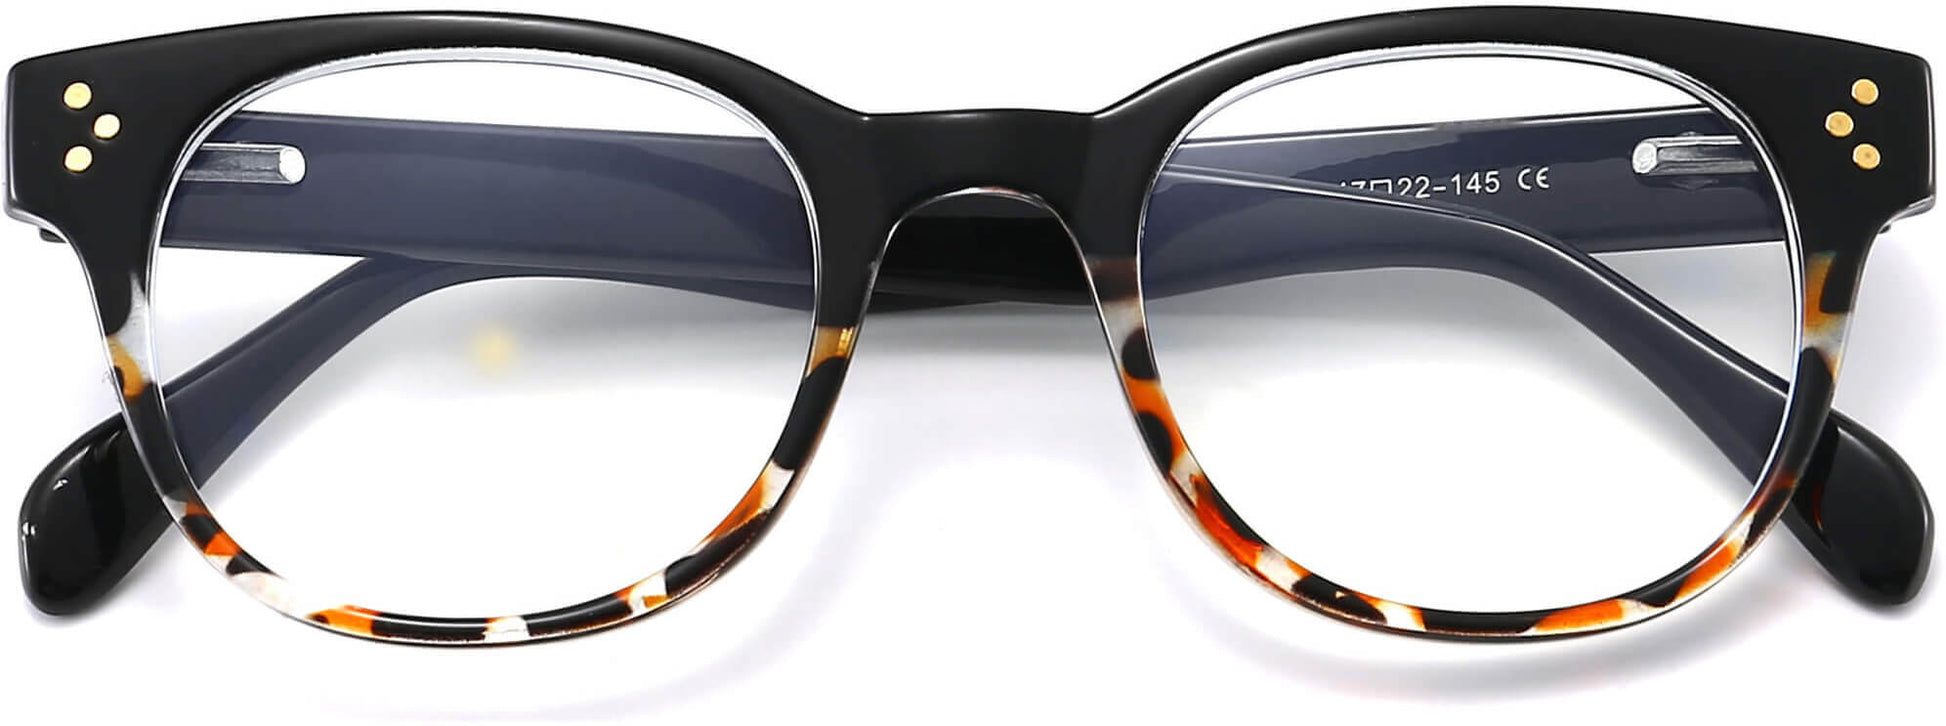 Kelly Round Tortoise Eyeglasses from ANRRI, closed view